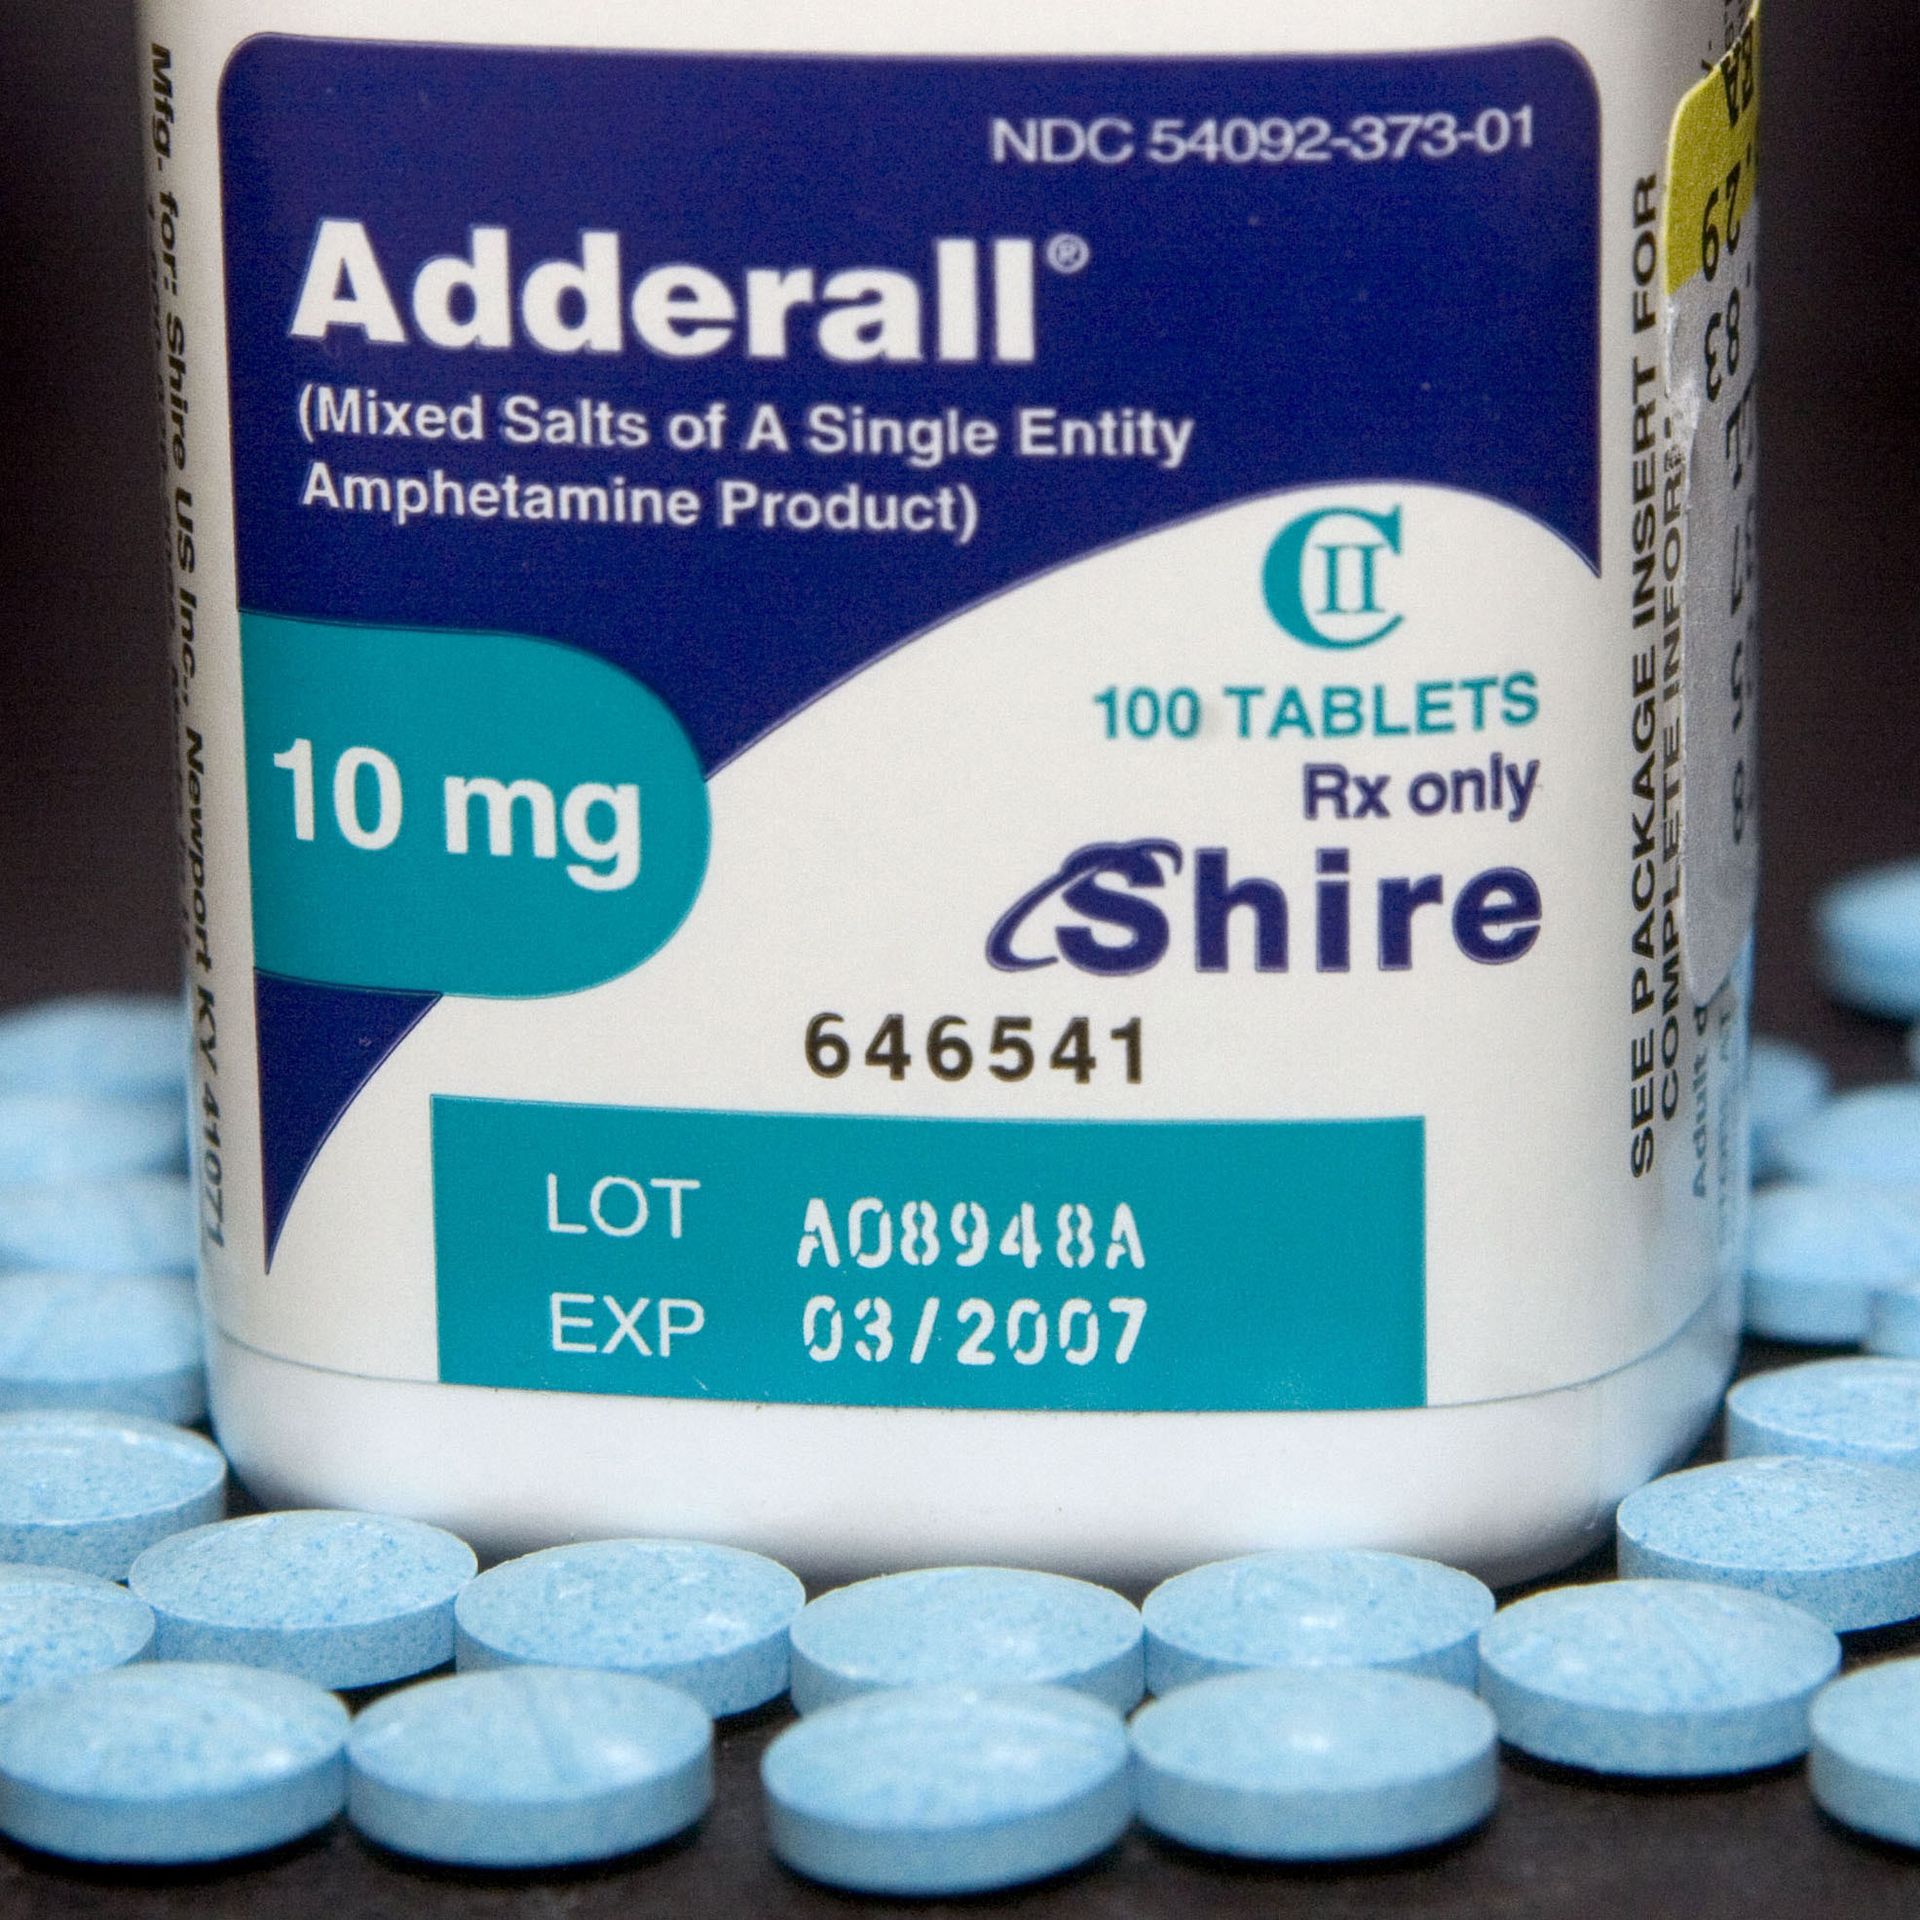 Telehealth startup to stop prescribing Adderall for new ADHD patients.